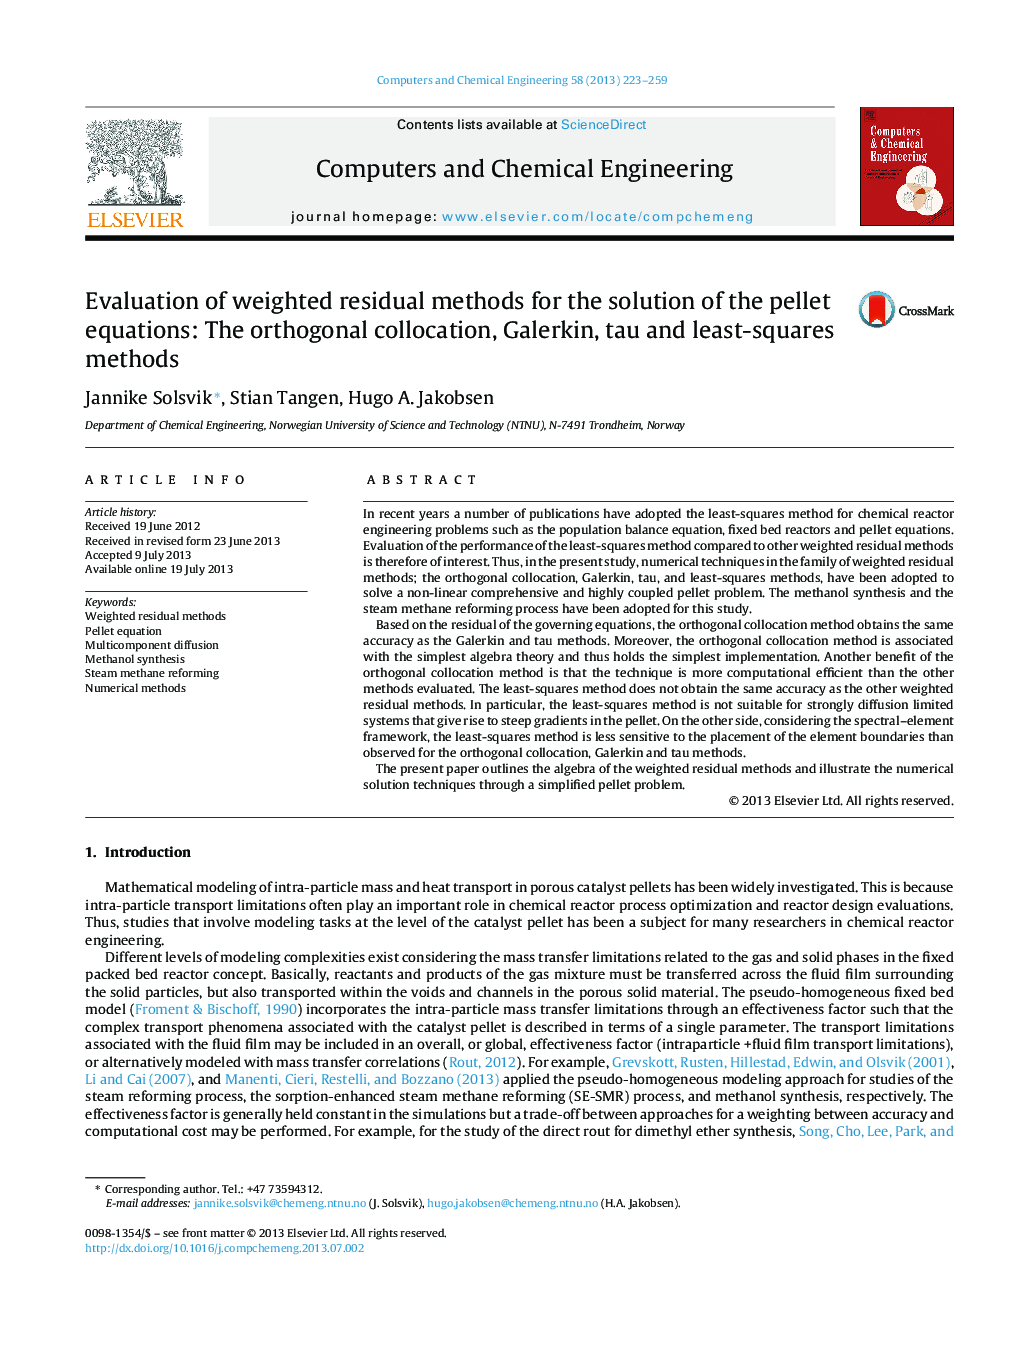 Evaluation of weighted residual methods for the solution of the pellet equations: The orthogonal collocation, Galerkin, tau and least-squares methods